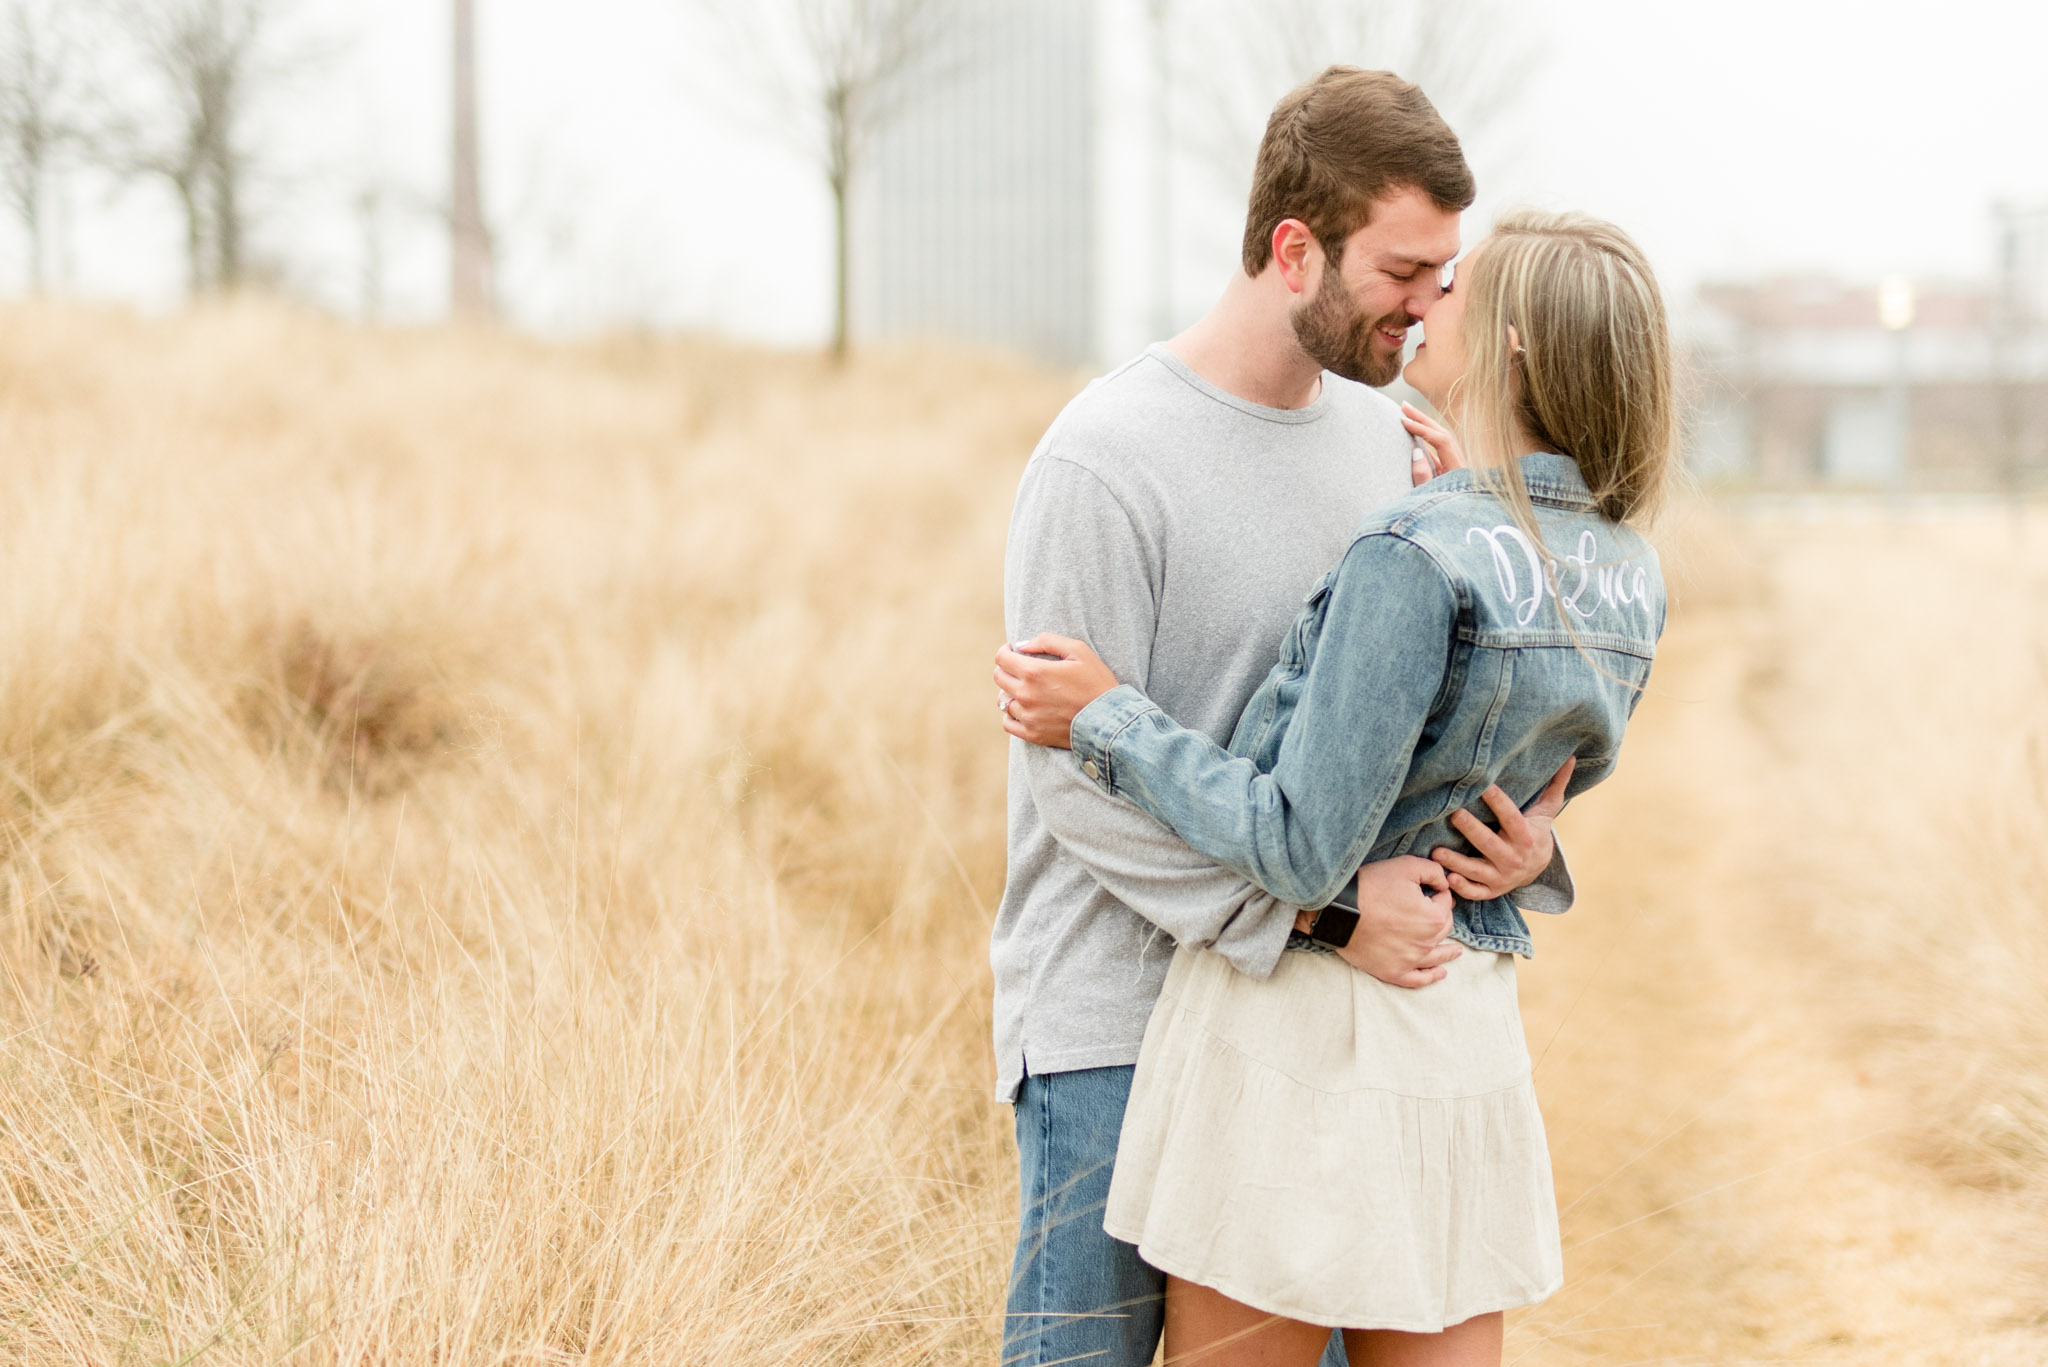 Couple leans in for kiss in field.